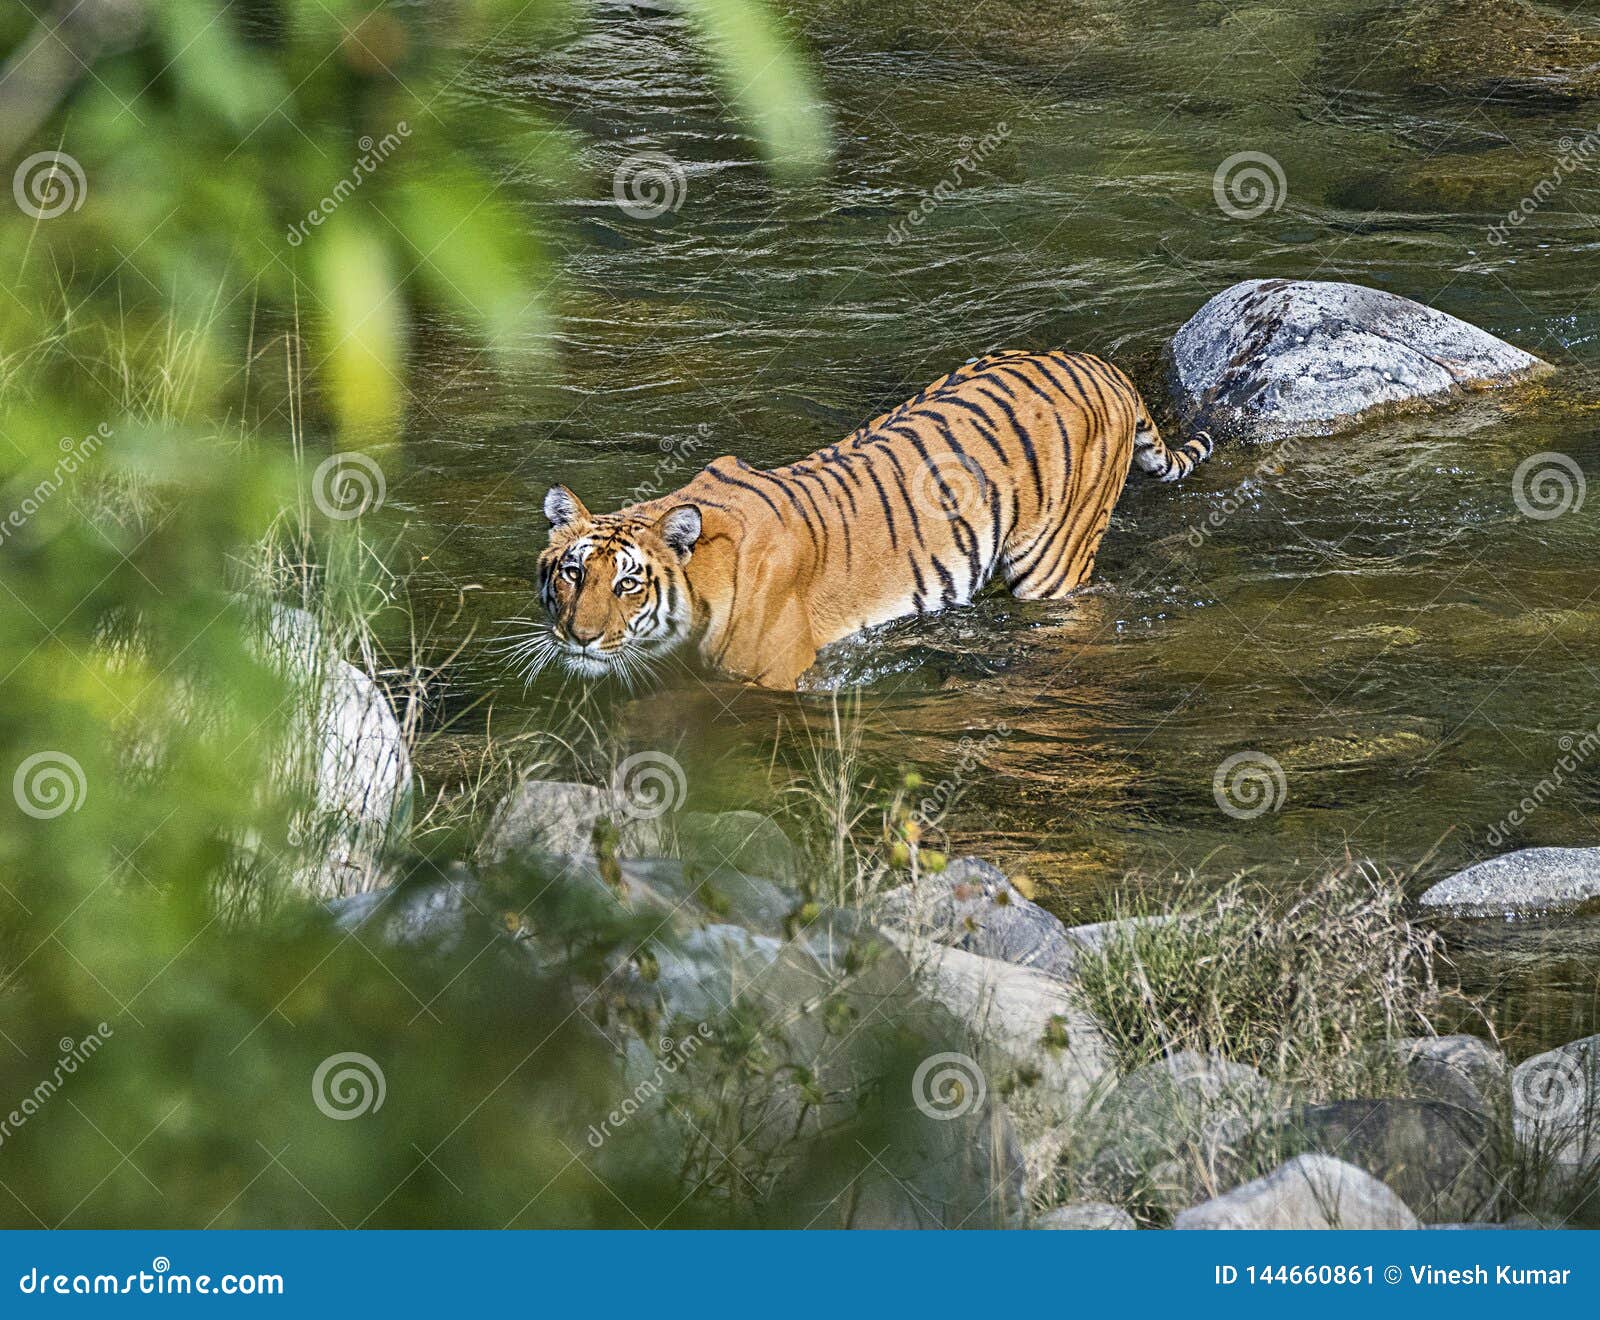 wild tiger: crossing river in the forest of jim corbett